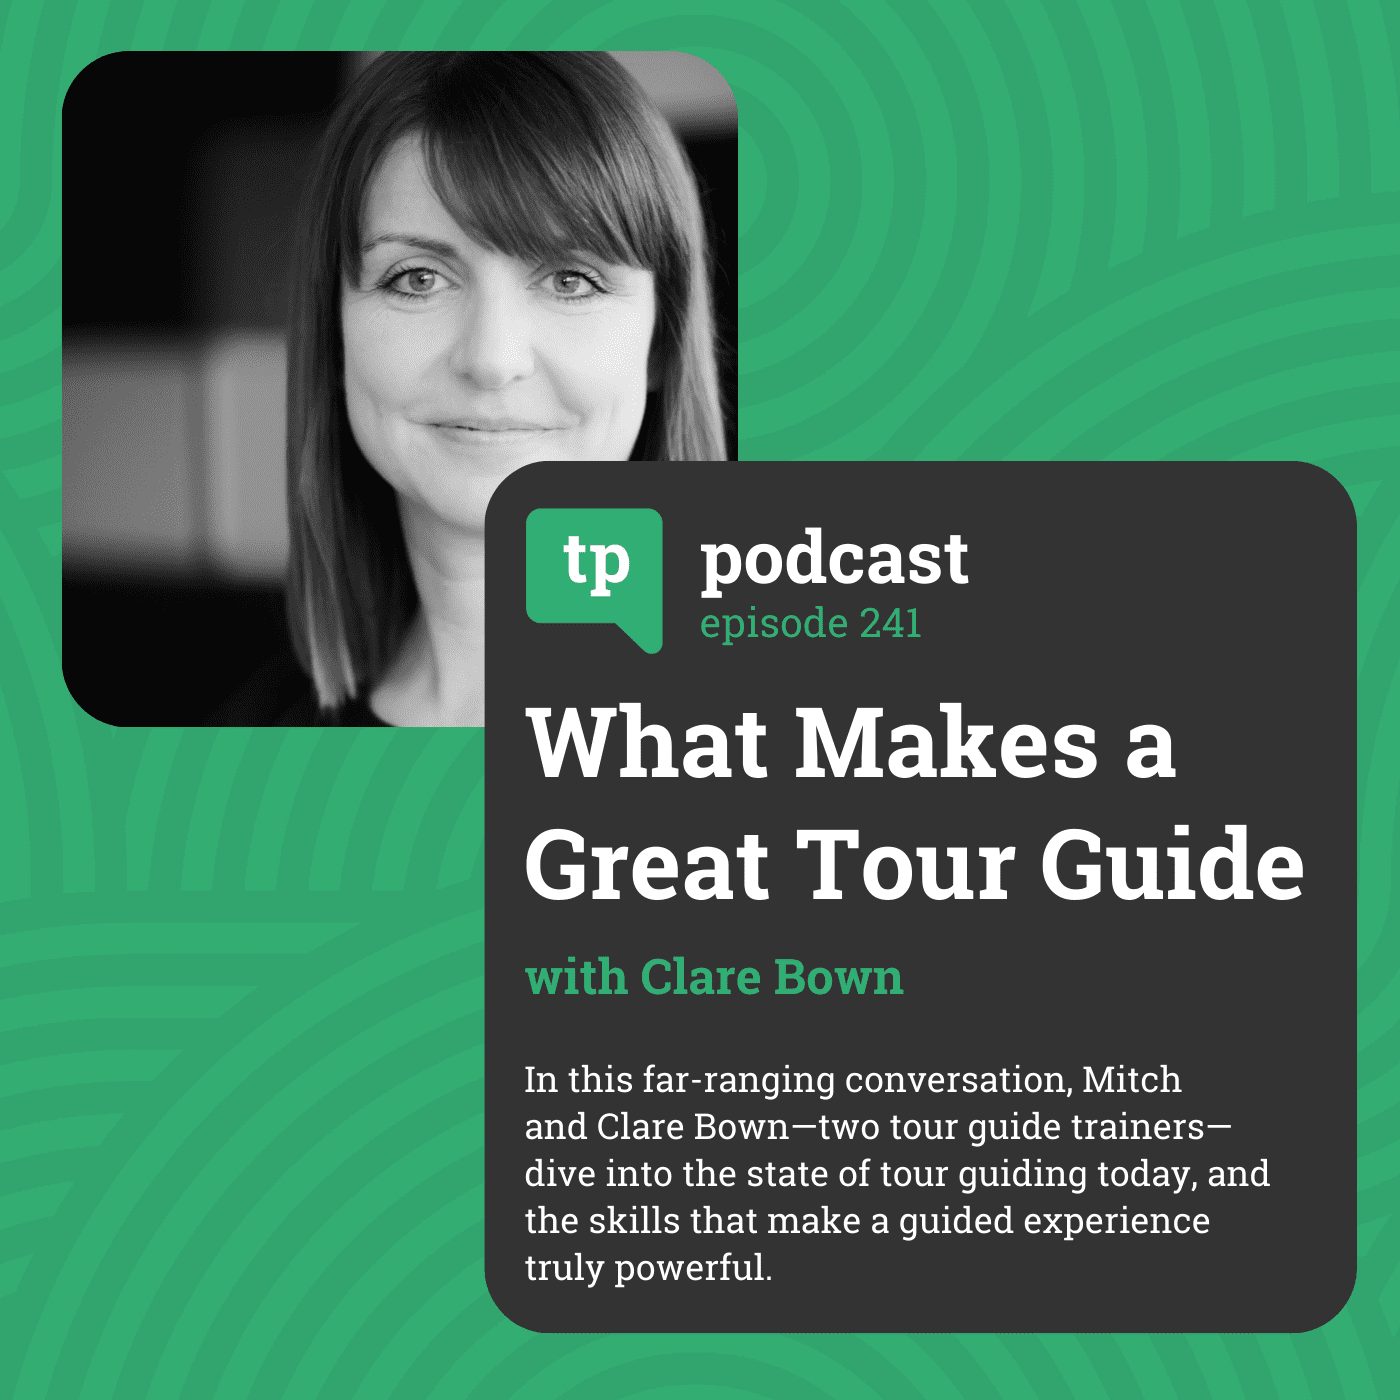 What Makes a Great Tour Guide